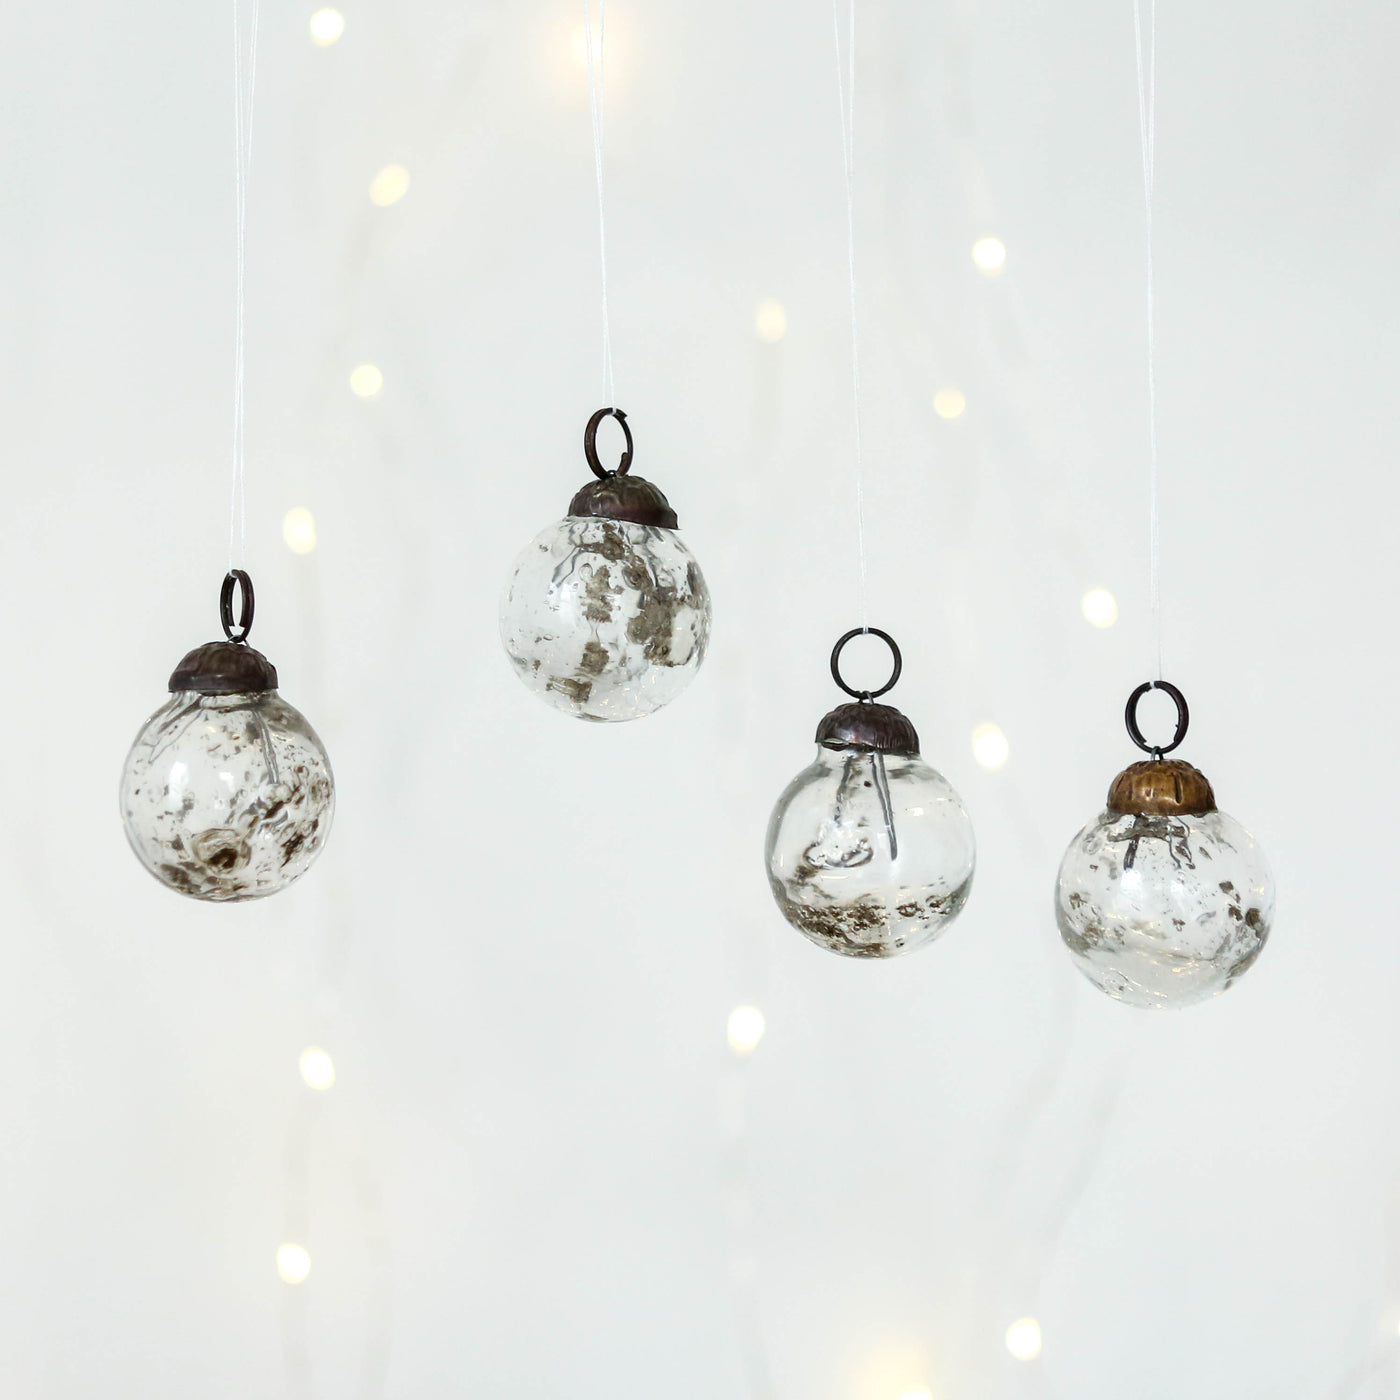 3cm Pebbled Glass Baubles, set of 4 - Clear